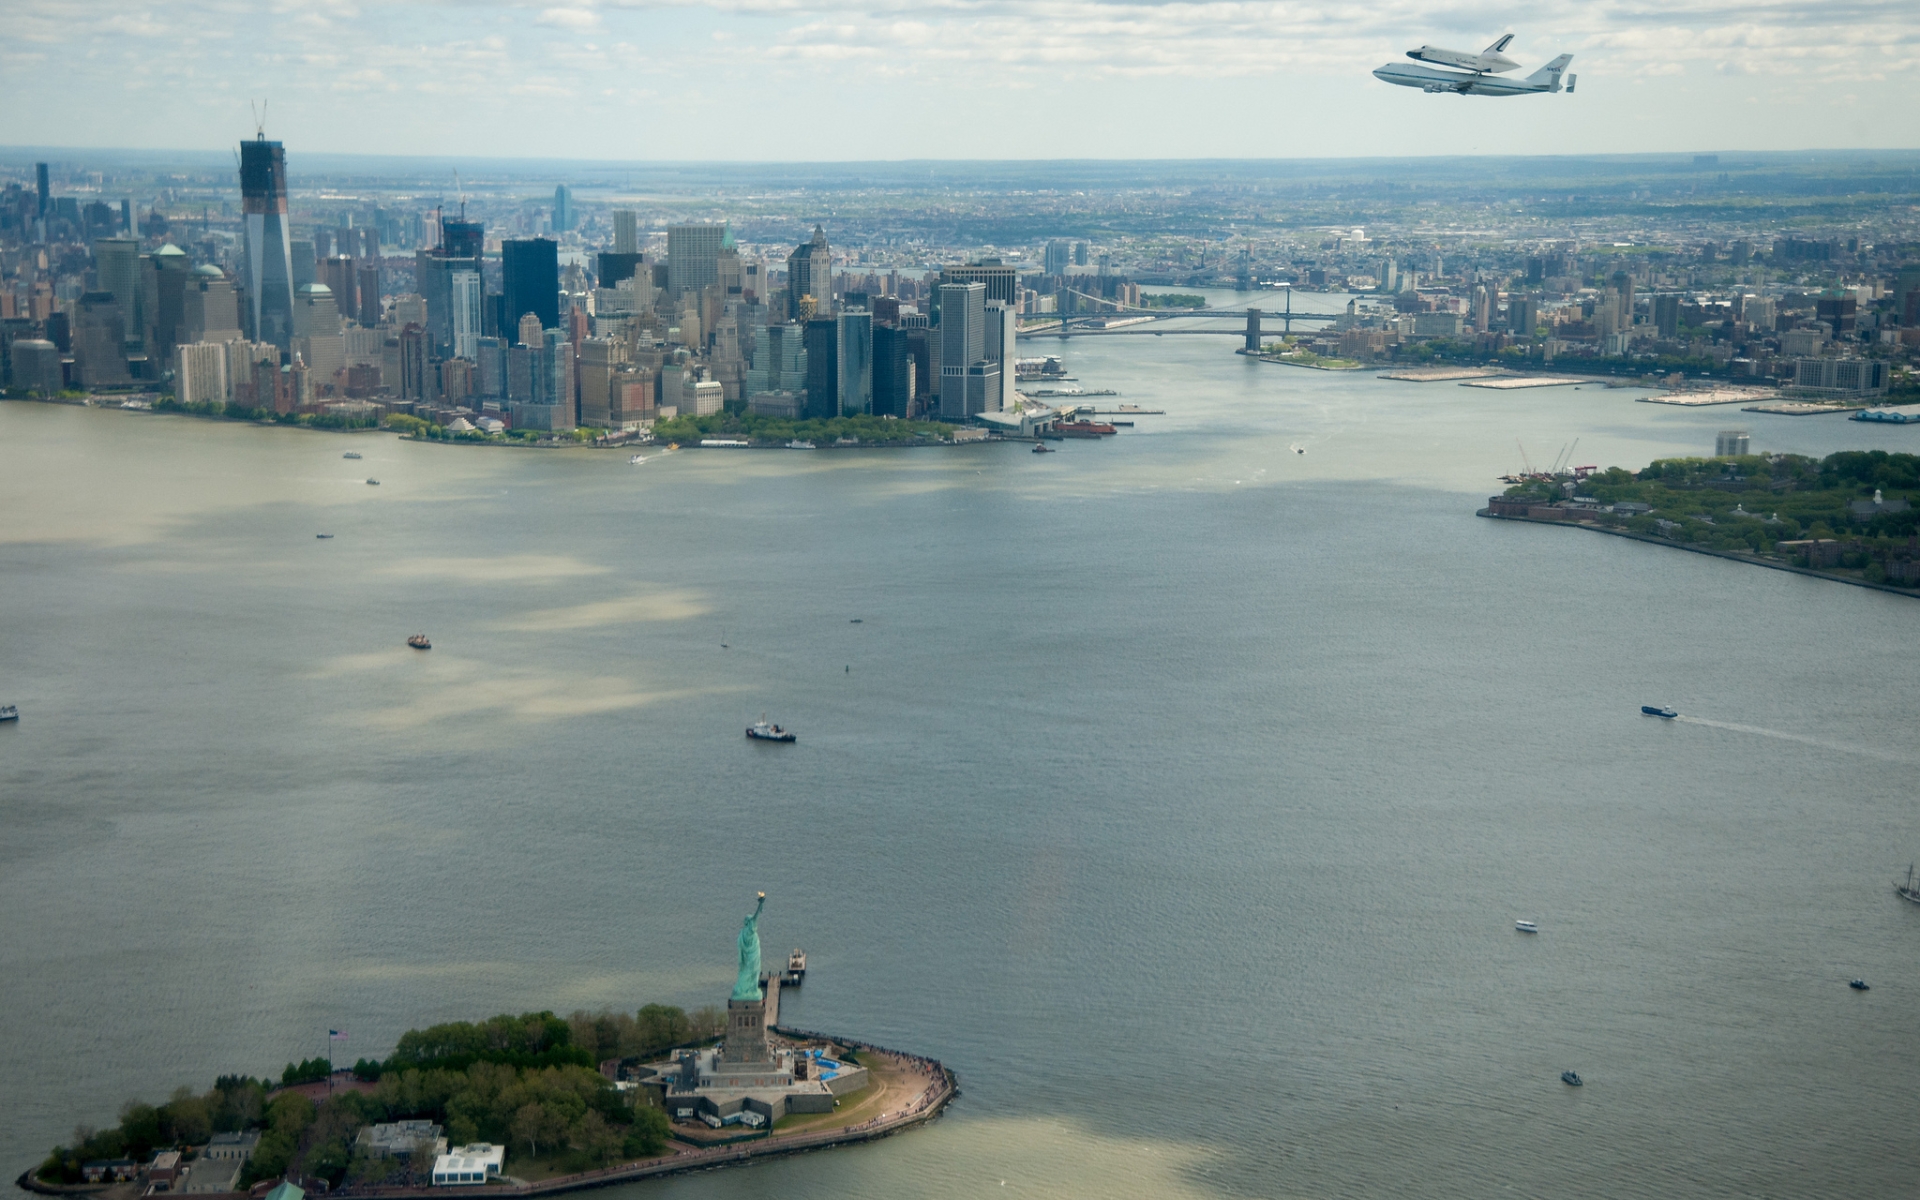 man made, city, airplane, building, cityscape, cloud, new york, shuttle, skyscraper, space shuttle, cities